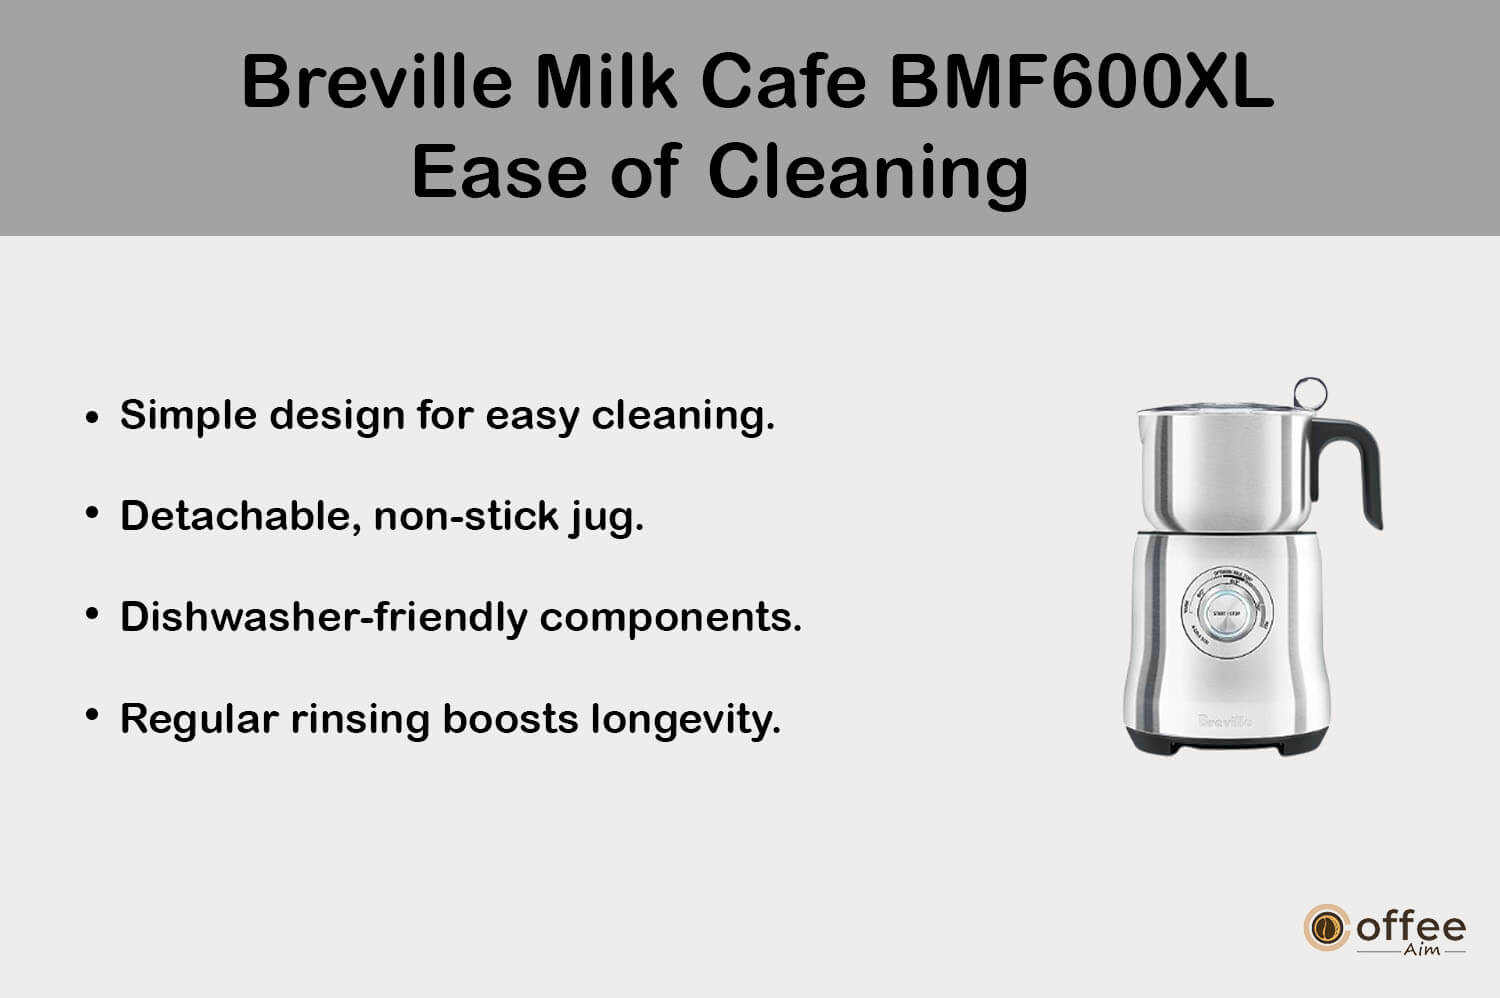 This graphic illustrates the ease of cleaning for the "Breville Milk Cafe BMF600XL," as discussed in the "Breville Milk Cafe BMF600XL Review" article.